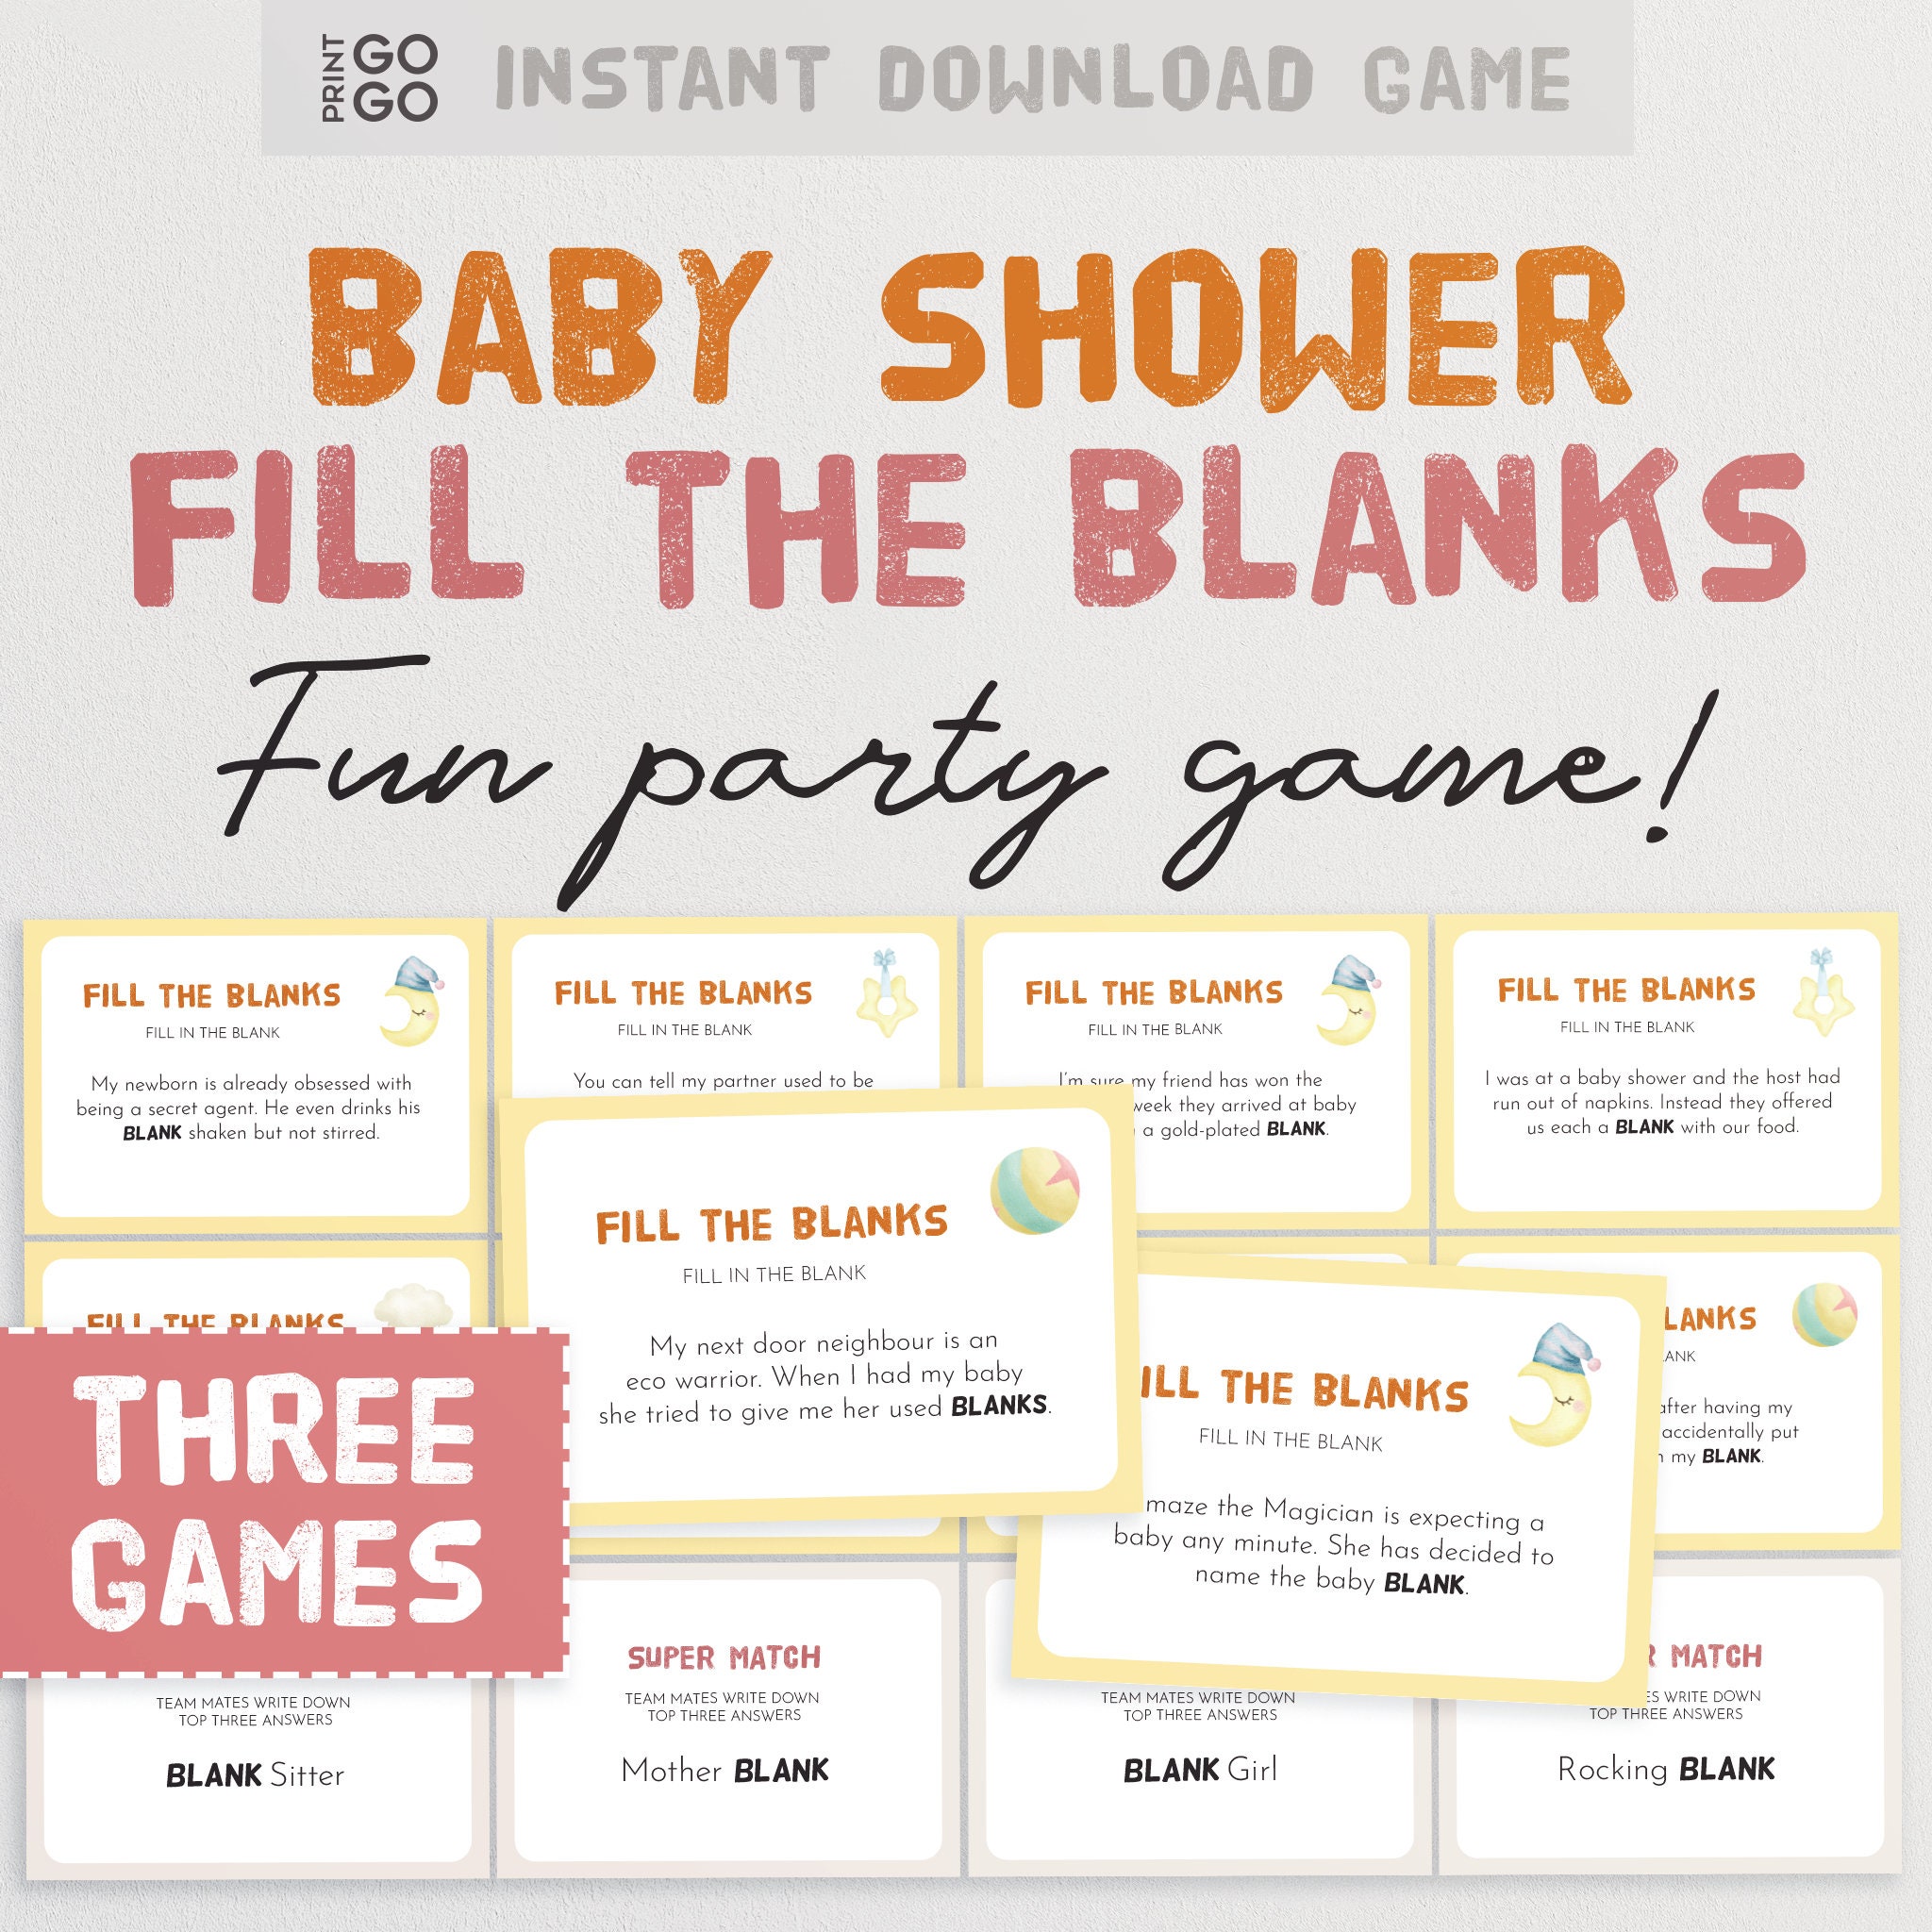 Baby Shower Fill the Blanks the Hilarious Party Game of Completing